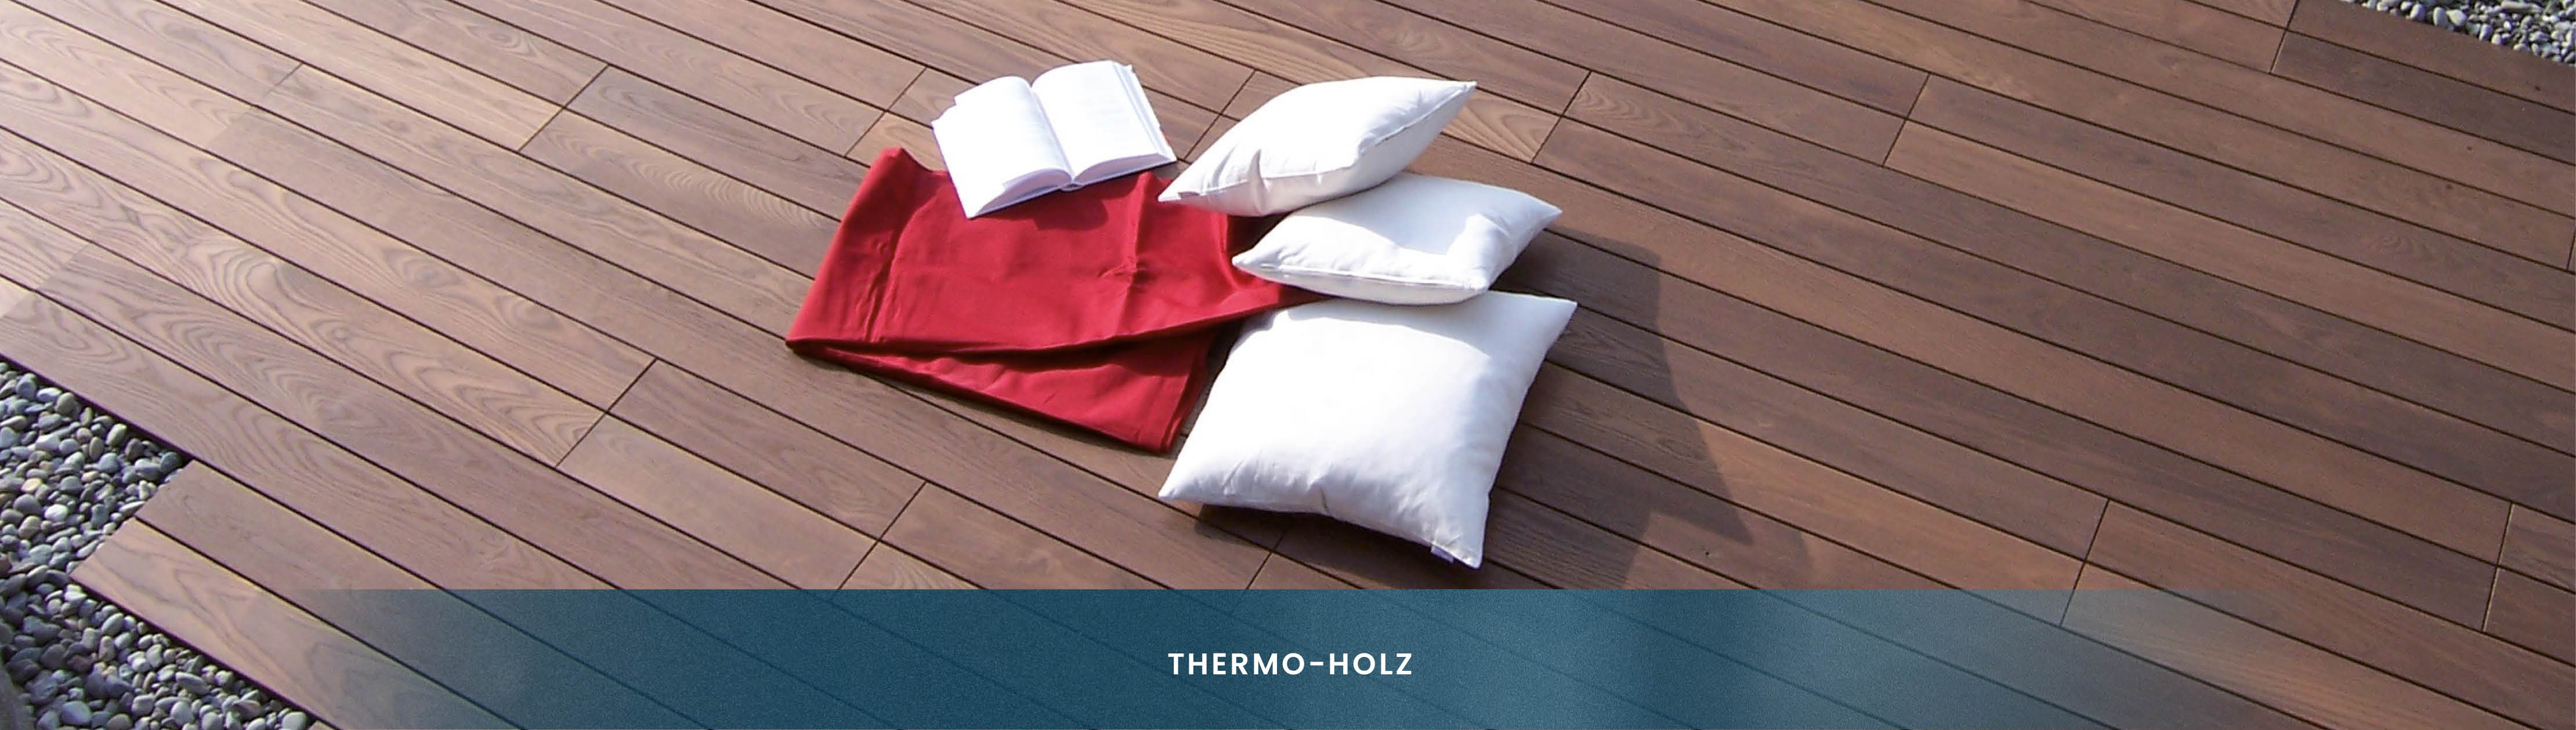 Thermo-Holz